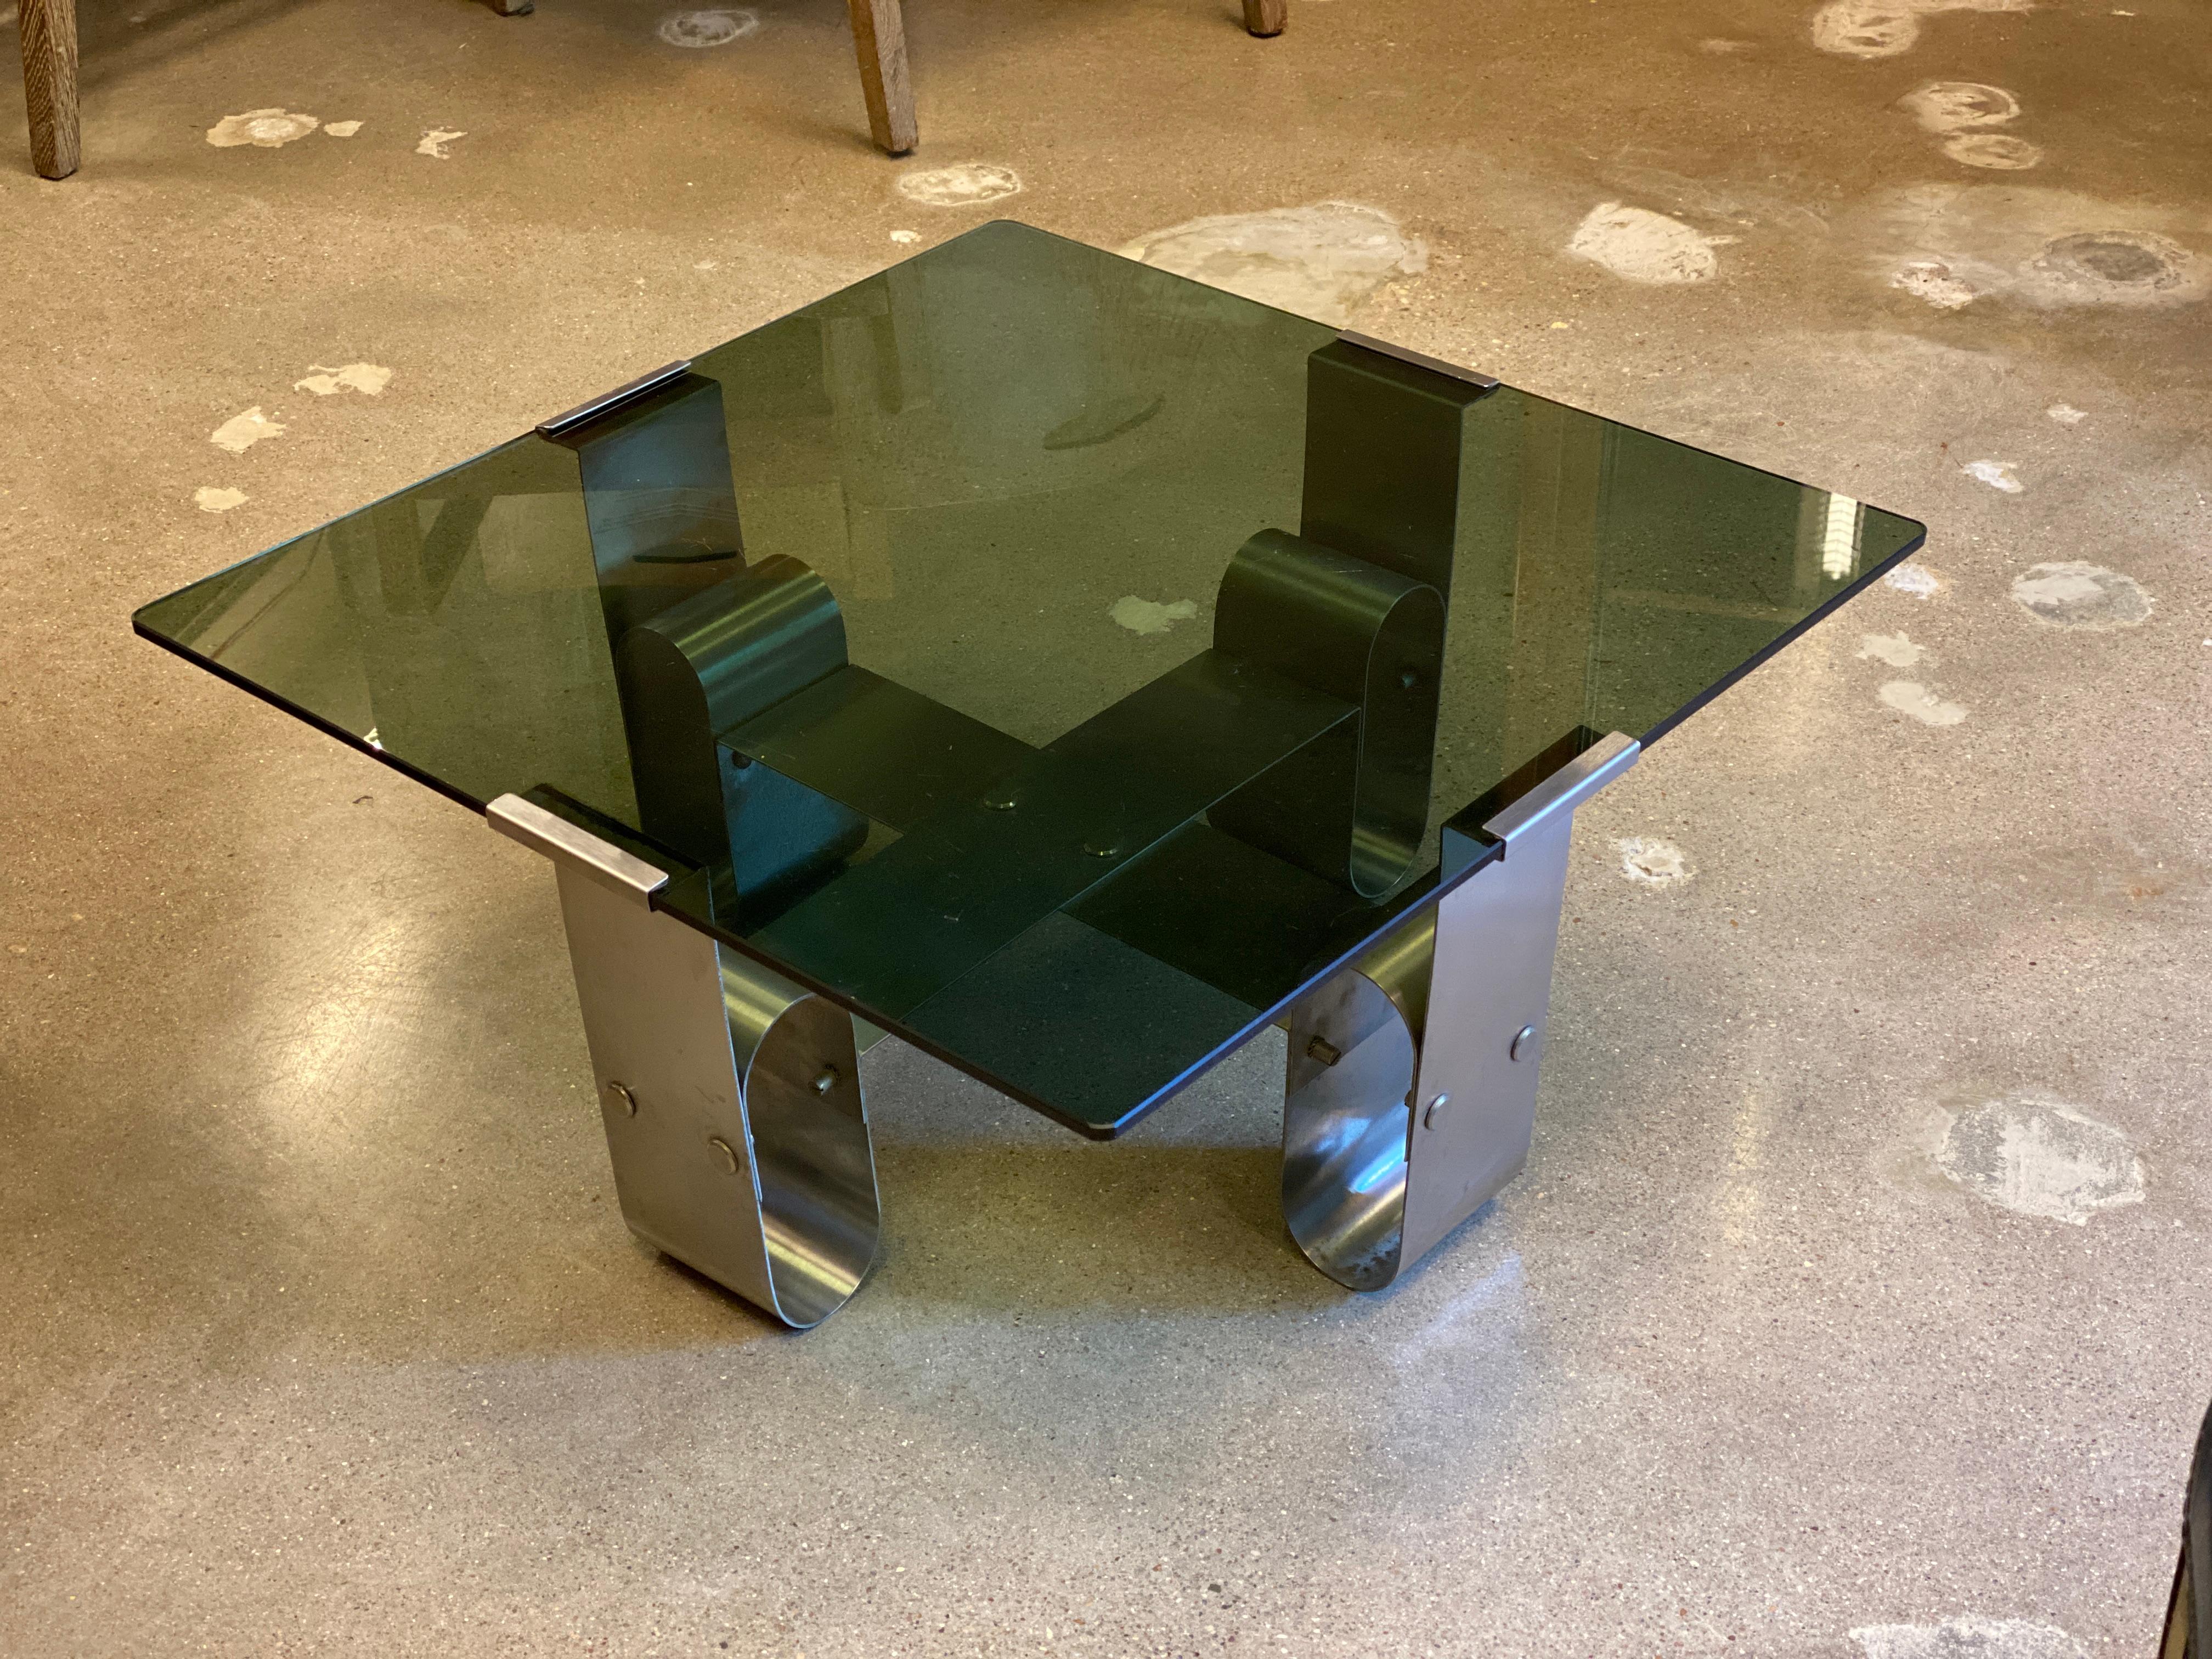 Vintage French Mid-Century Modern table by Francois Monnet for Kappa. Smoked glass is compression fitted to the brushed stainless steel base, circa 1970.